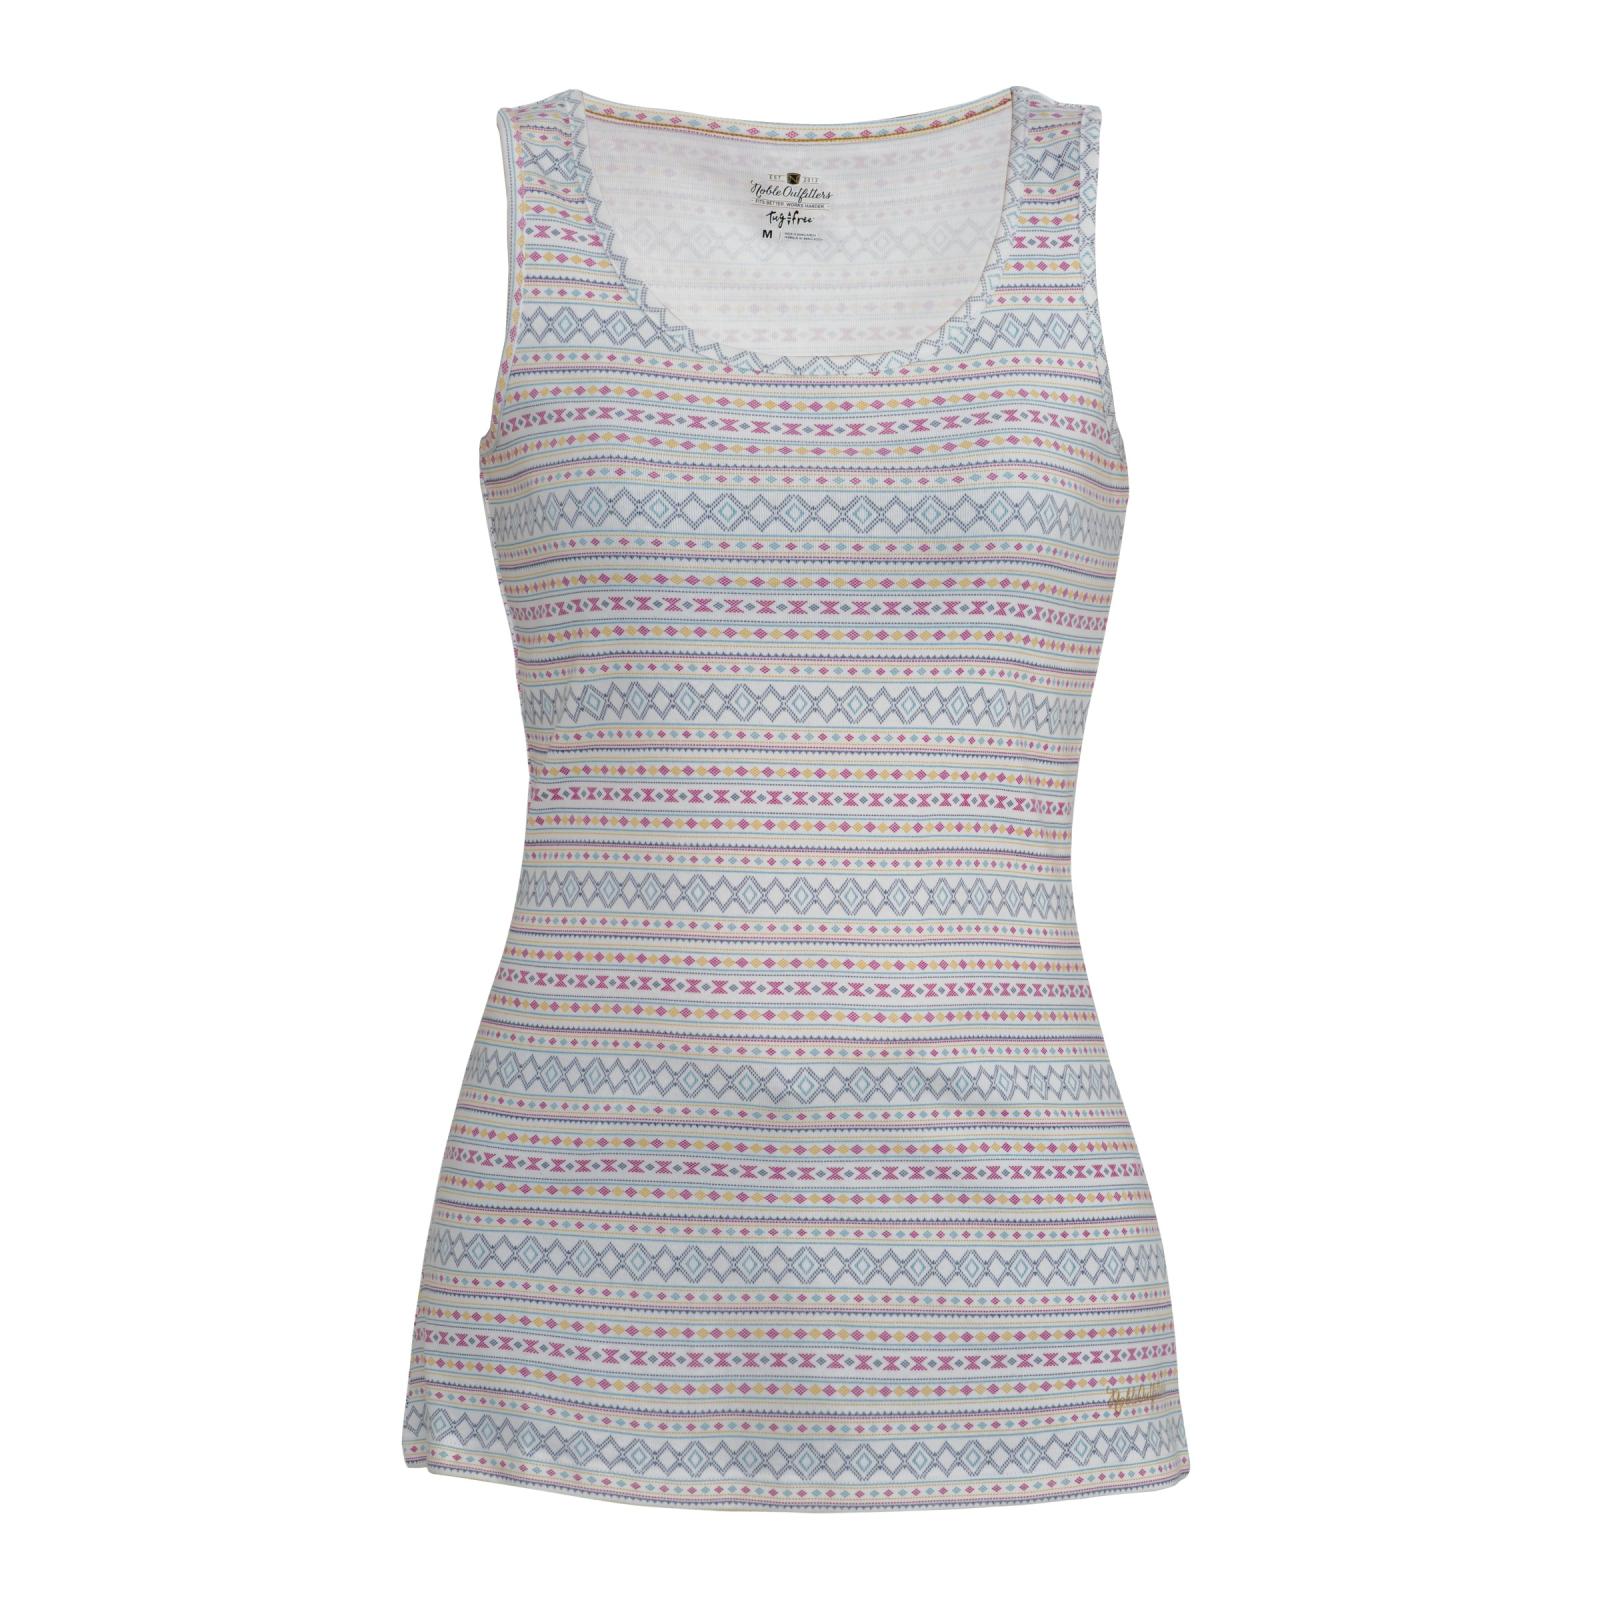 Noble Outfitters Women's Tug-Free™ Tank